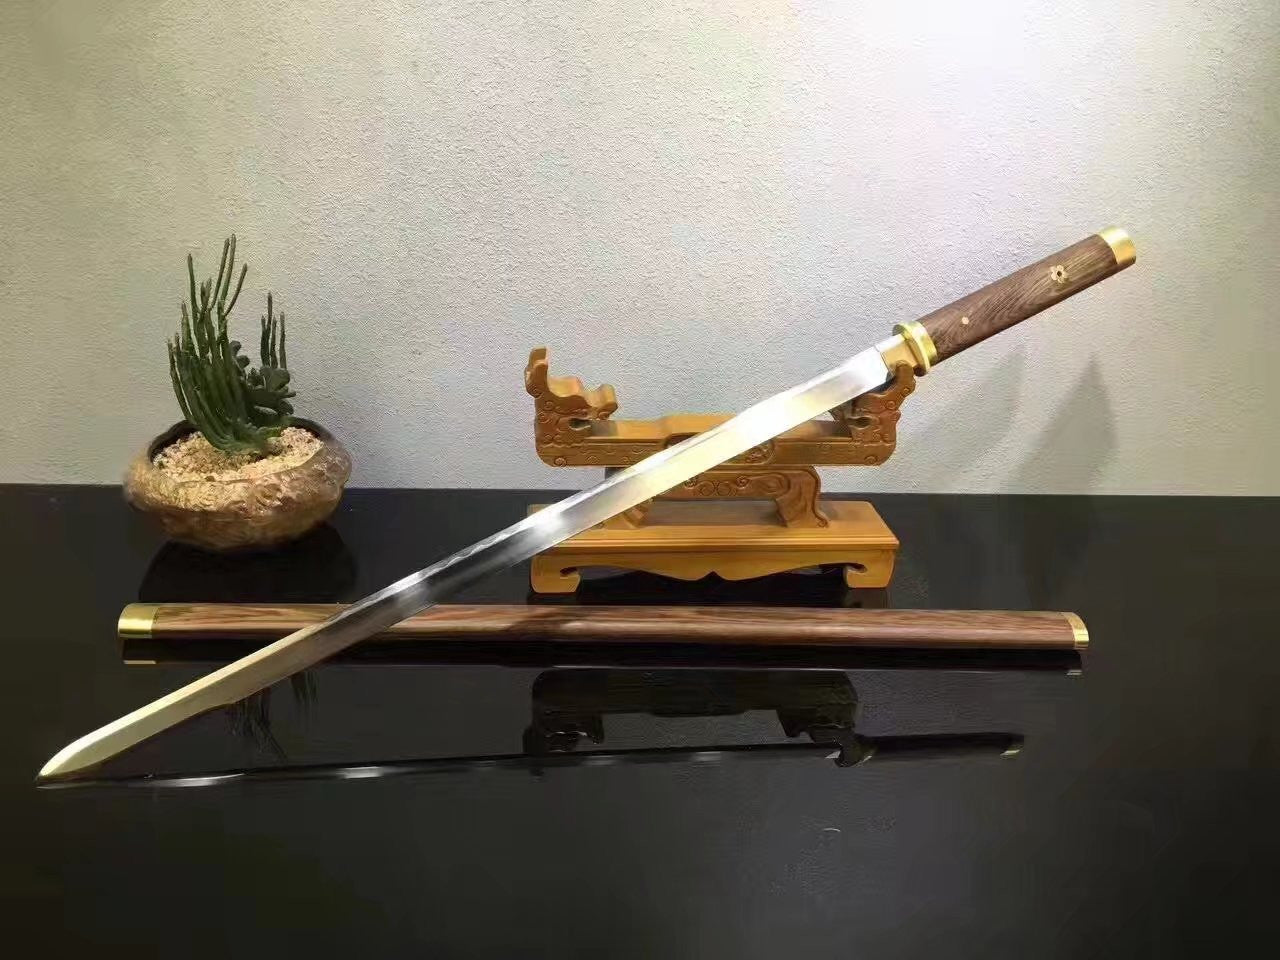 Tang sword,Folded steel Turns the soil to burn blade blade,Full tang,Length 39 inch - Chinese sword shop